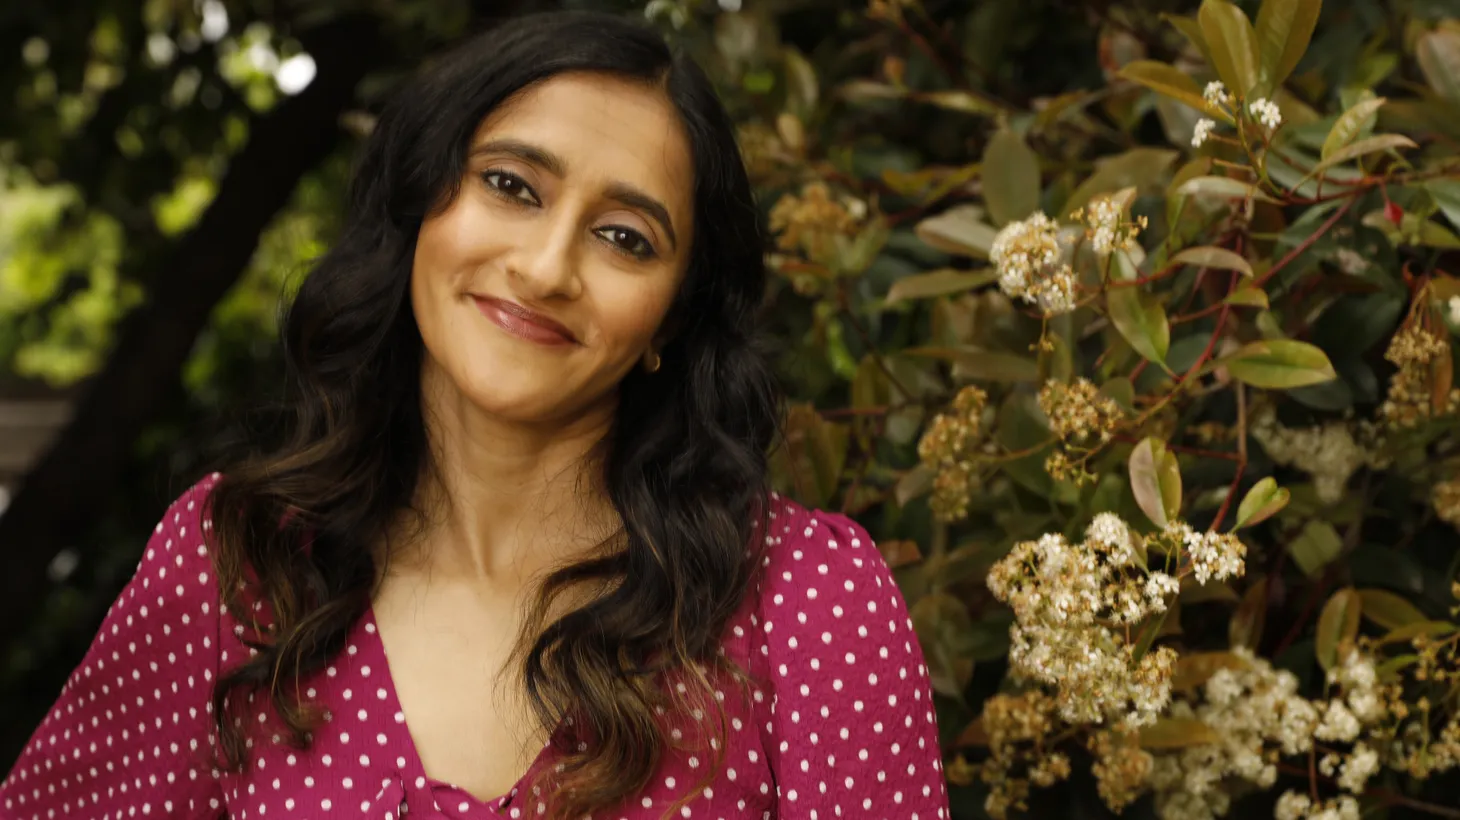 “You get to a certain standard that you hold yourself to, but then you suddenly feel other people's eyes on you, like either scrutinizing you or judging you. And then you want to hide again, so you find ways to diminish it and disqualify yourself from being there. And then the process just repeats endlessly,” says Aparna Nancherla.